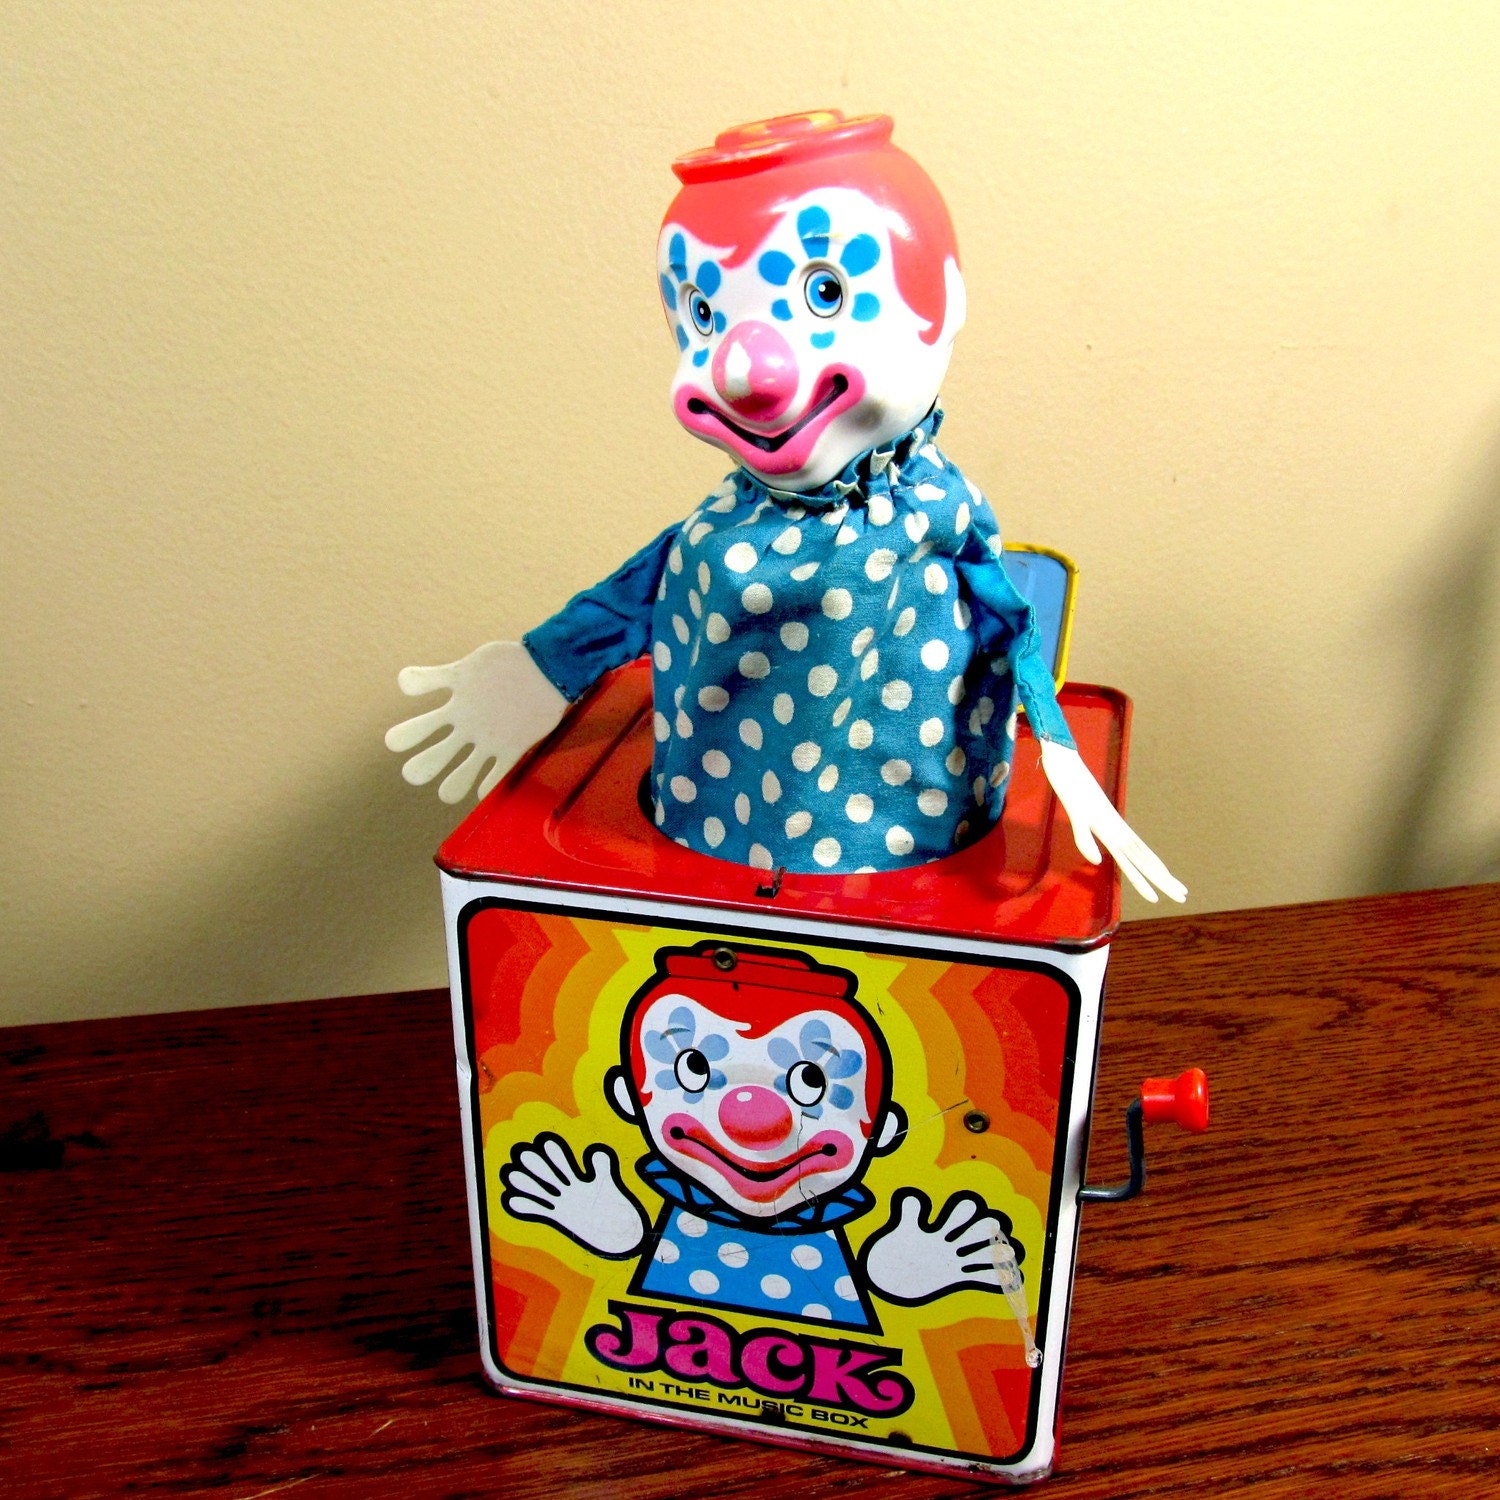 1971 Mattel Pressed Tin Jack in the box brightly colored and